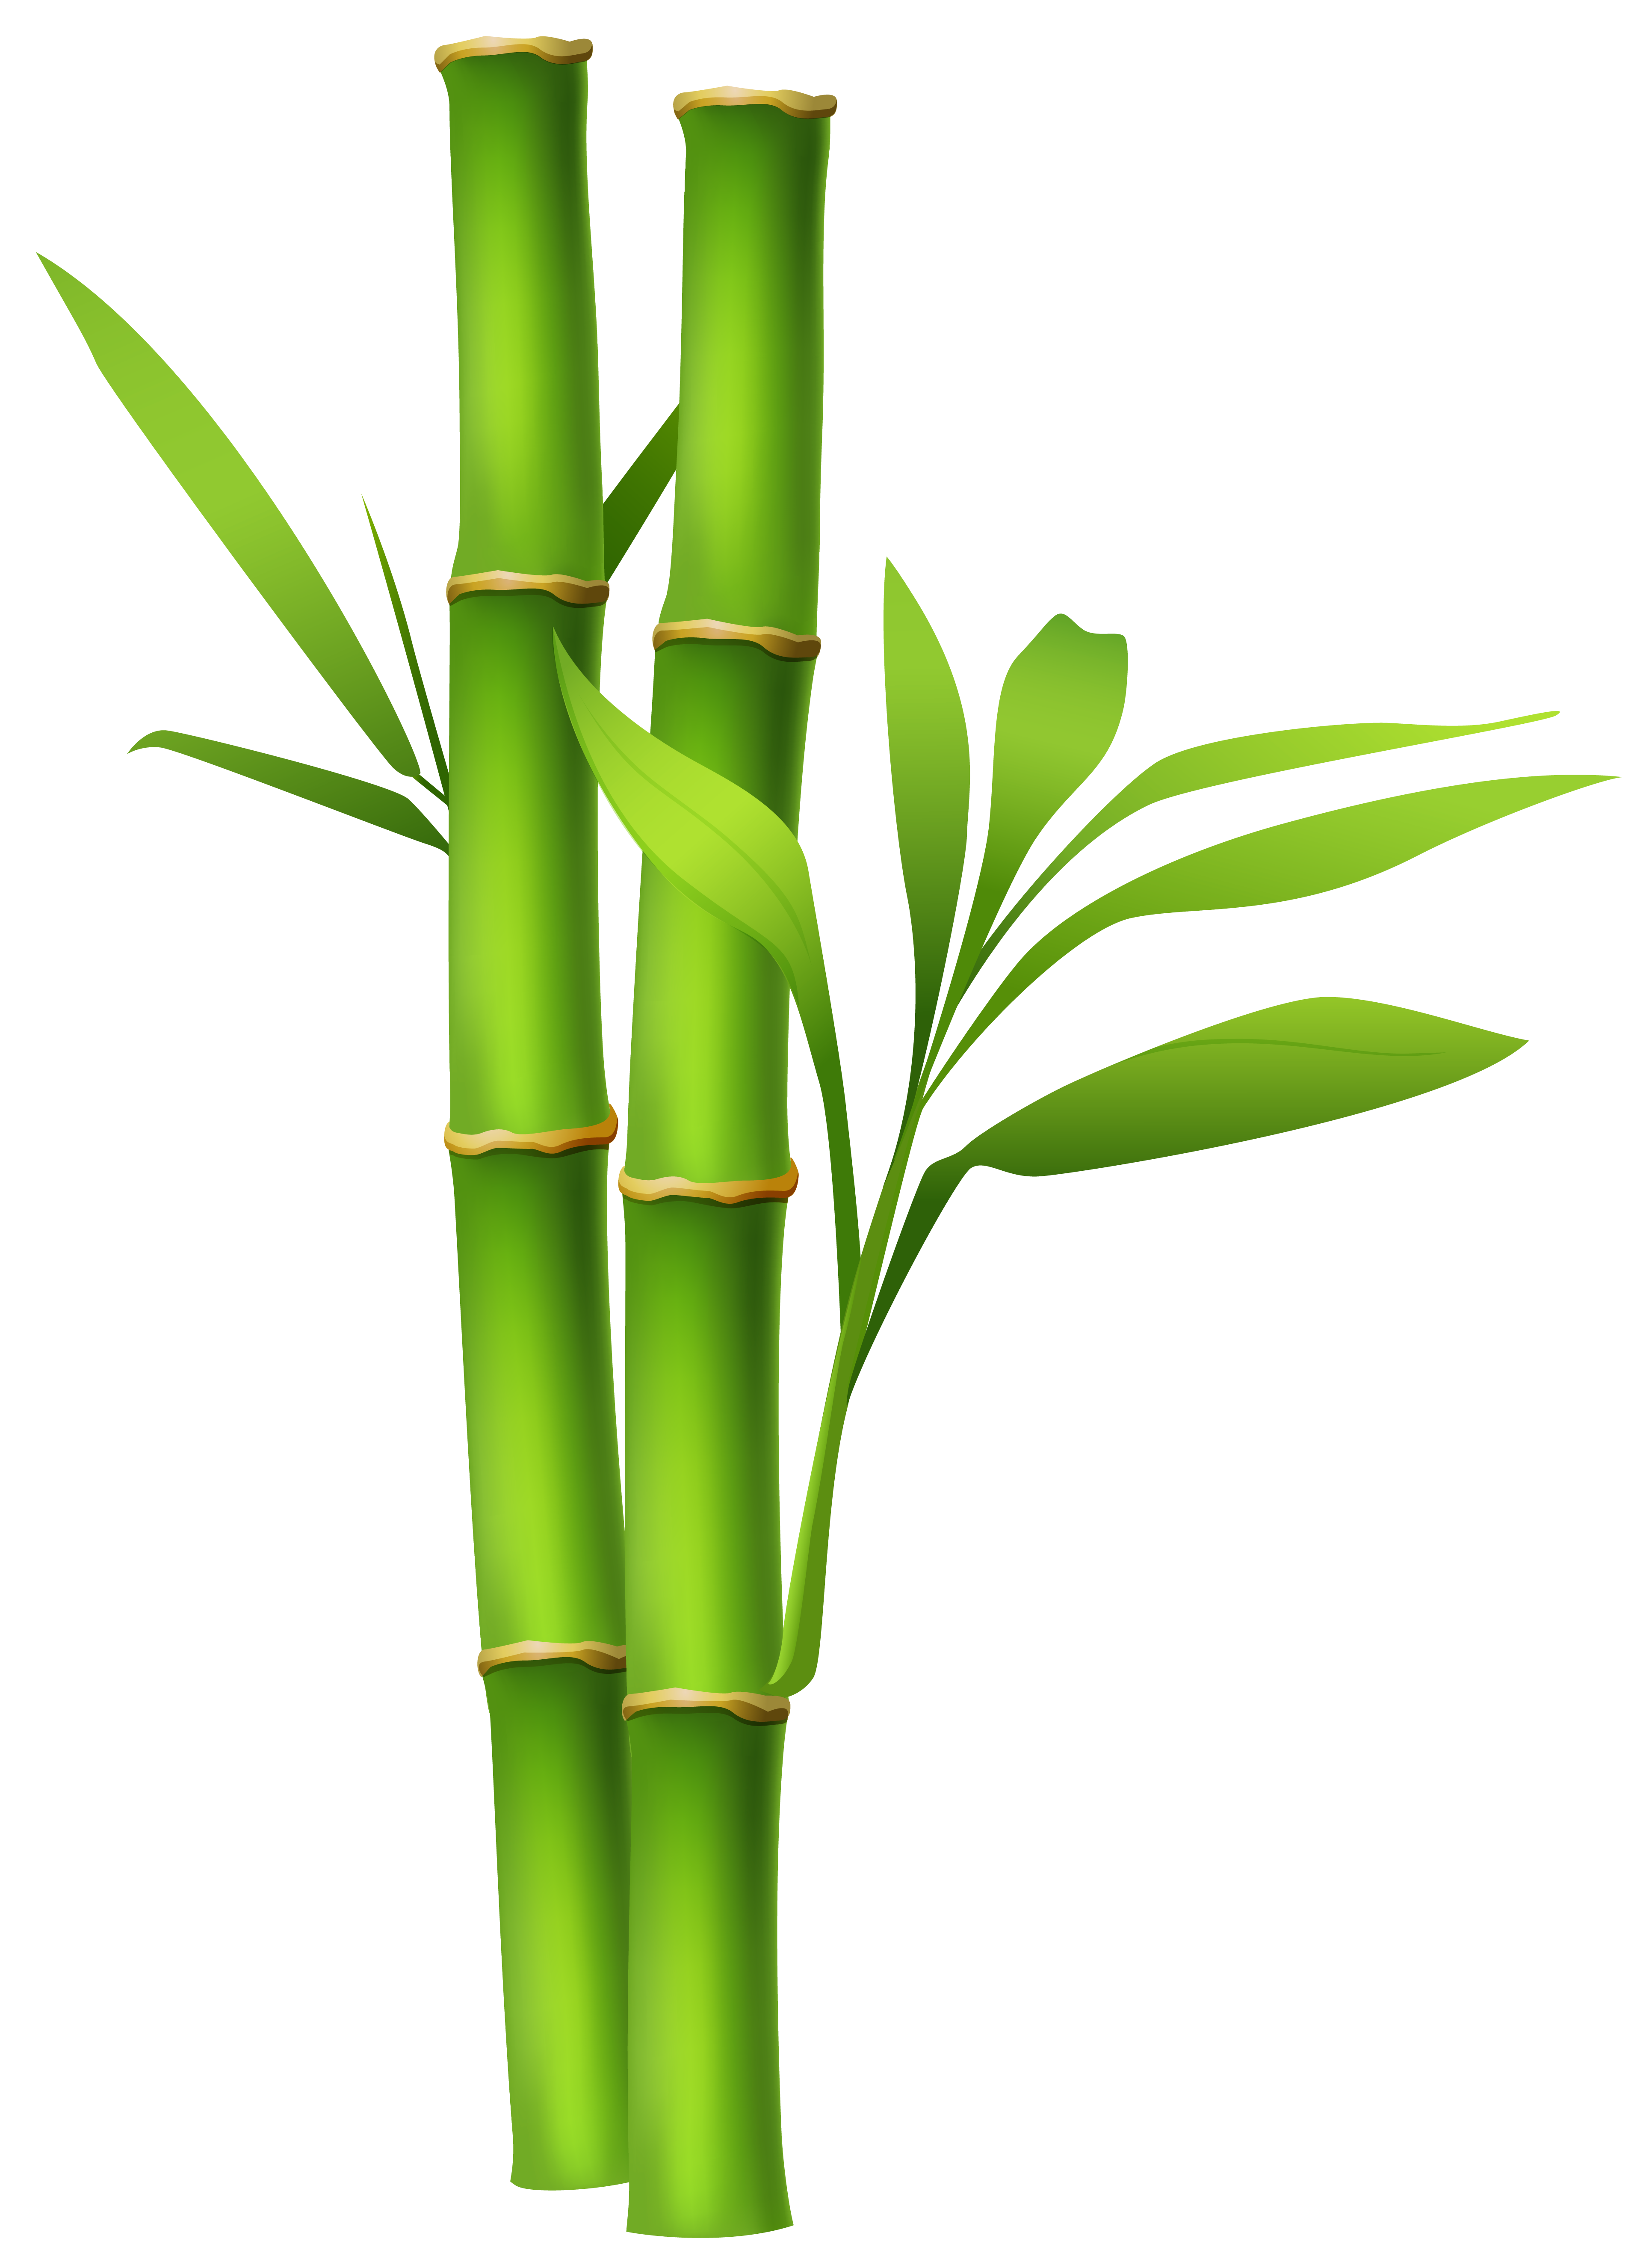 Bamboo Clipart & Bamboo Clip Art Images.